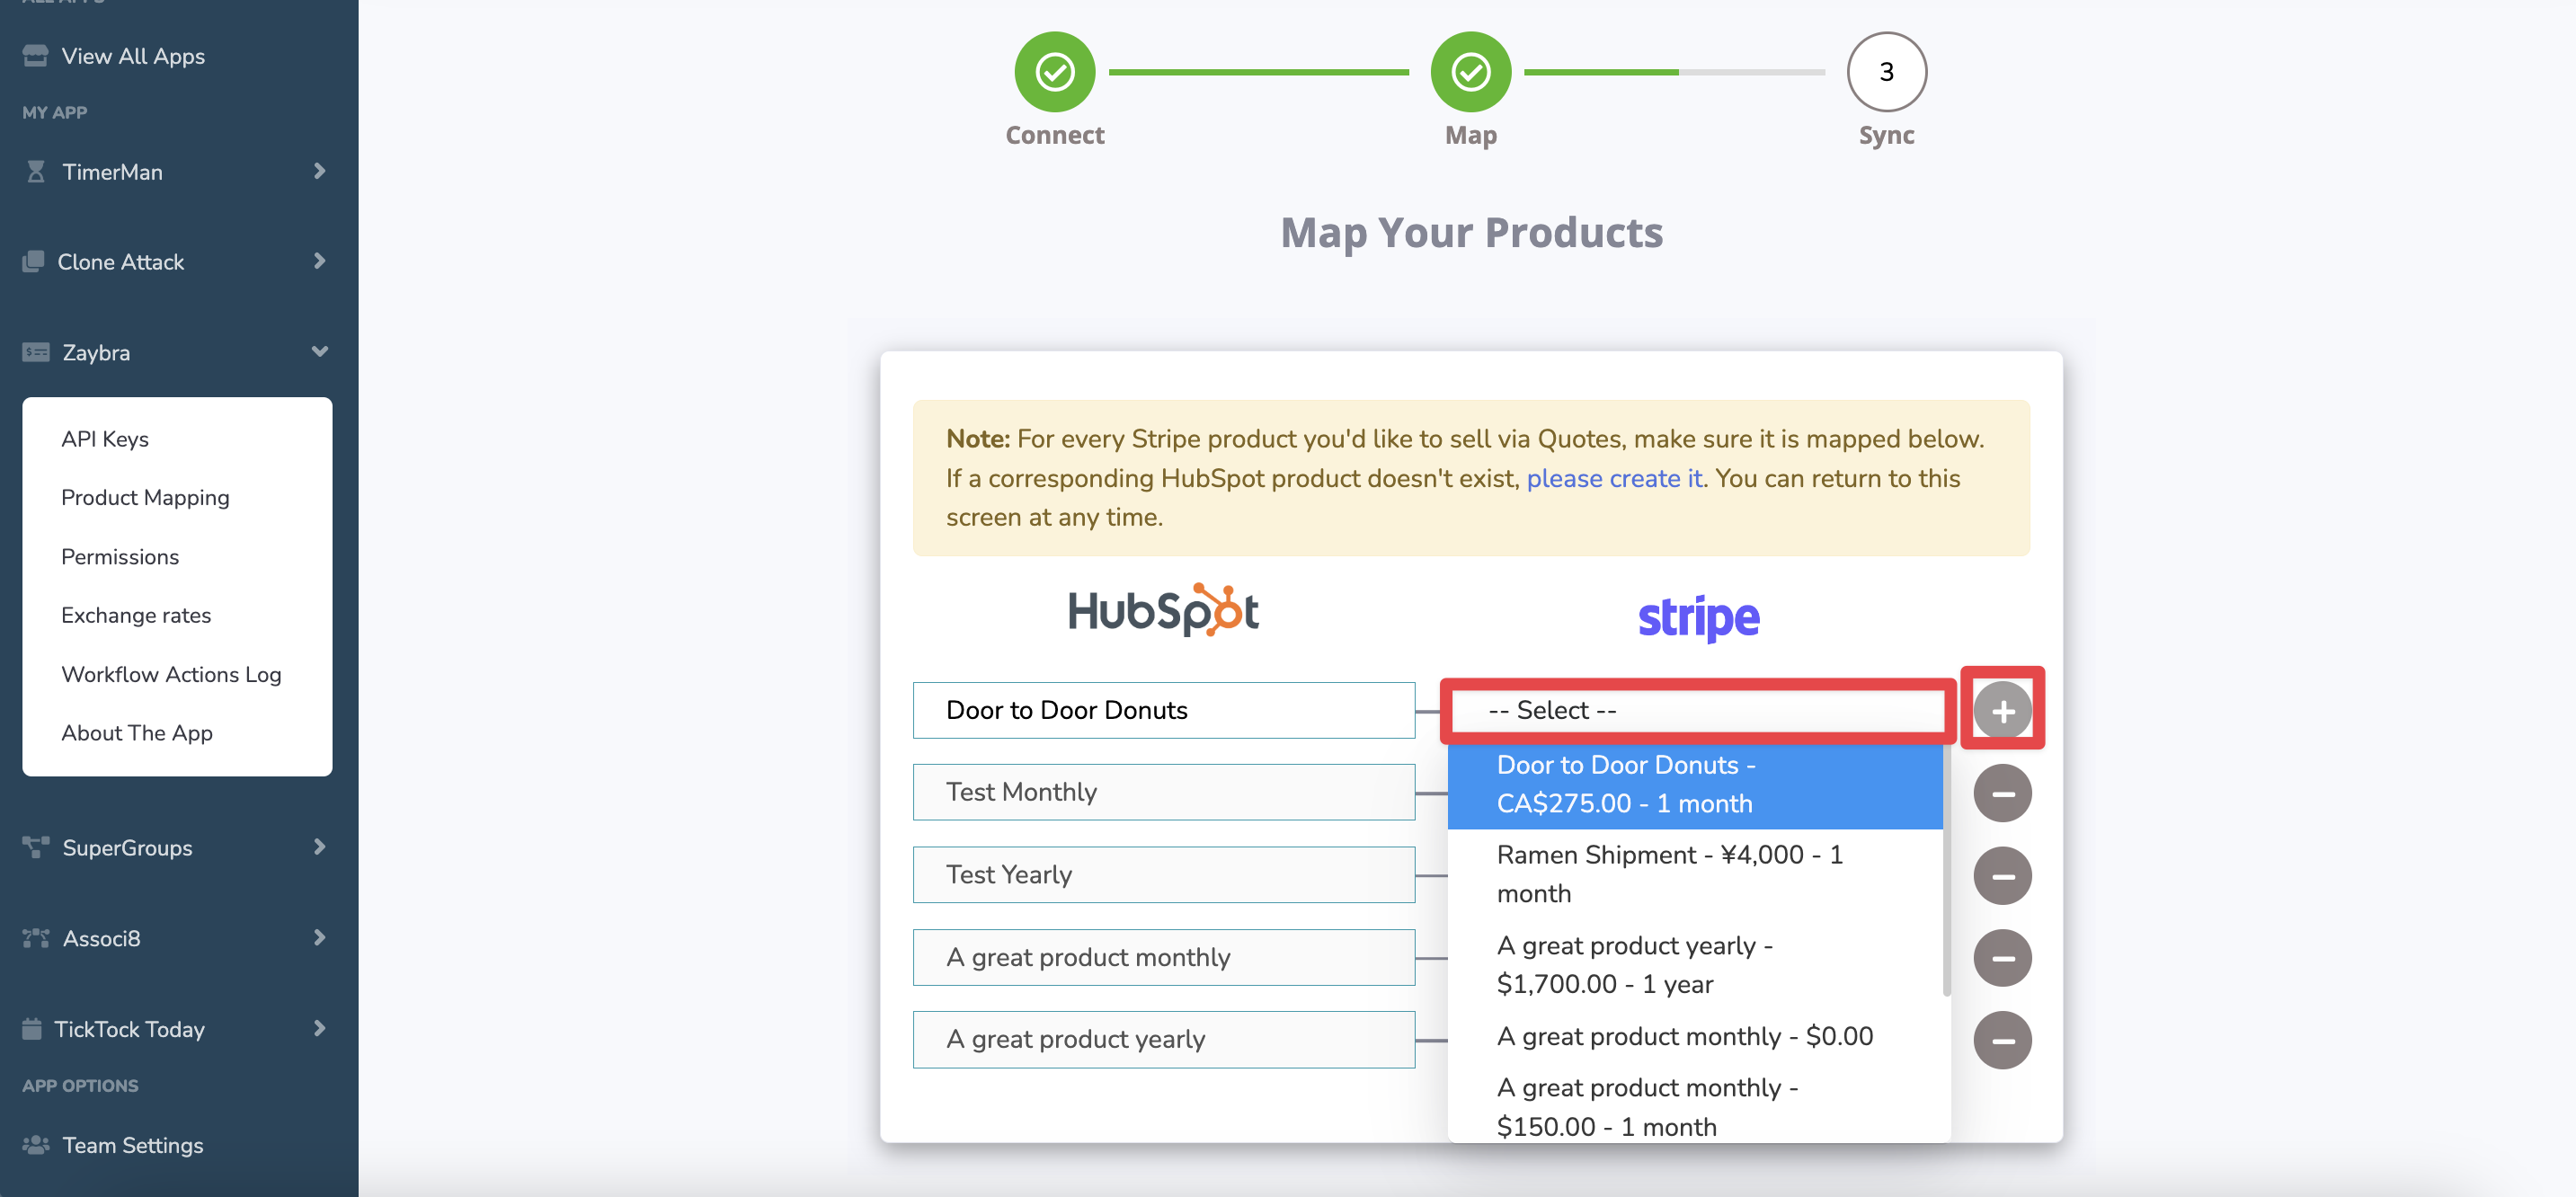 How to map Stripe products to HubSpot products using Zaybra